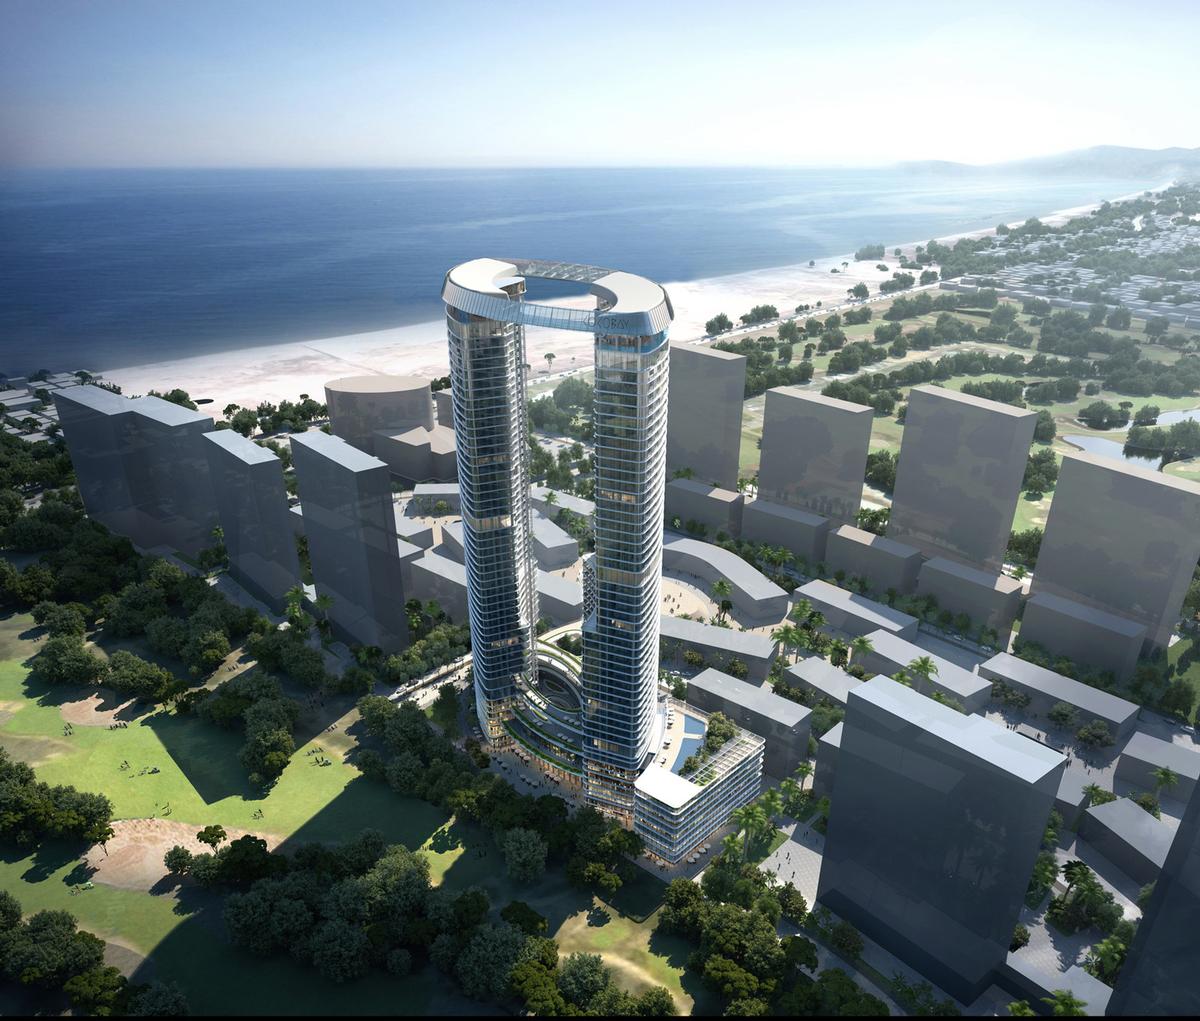 The hotel will be designed as twin towers, adjoined at the top by a 'crystal bridge'